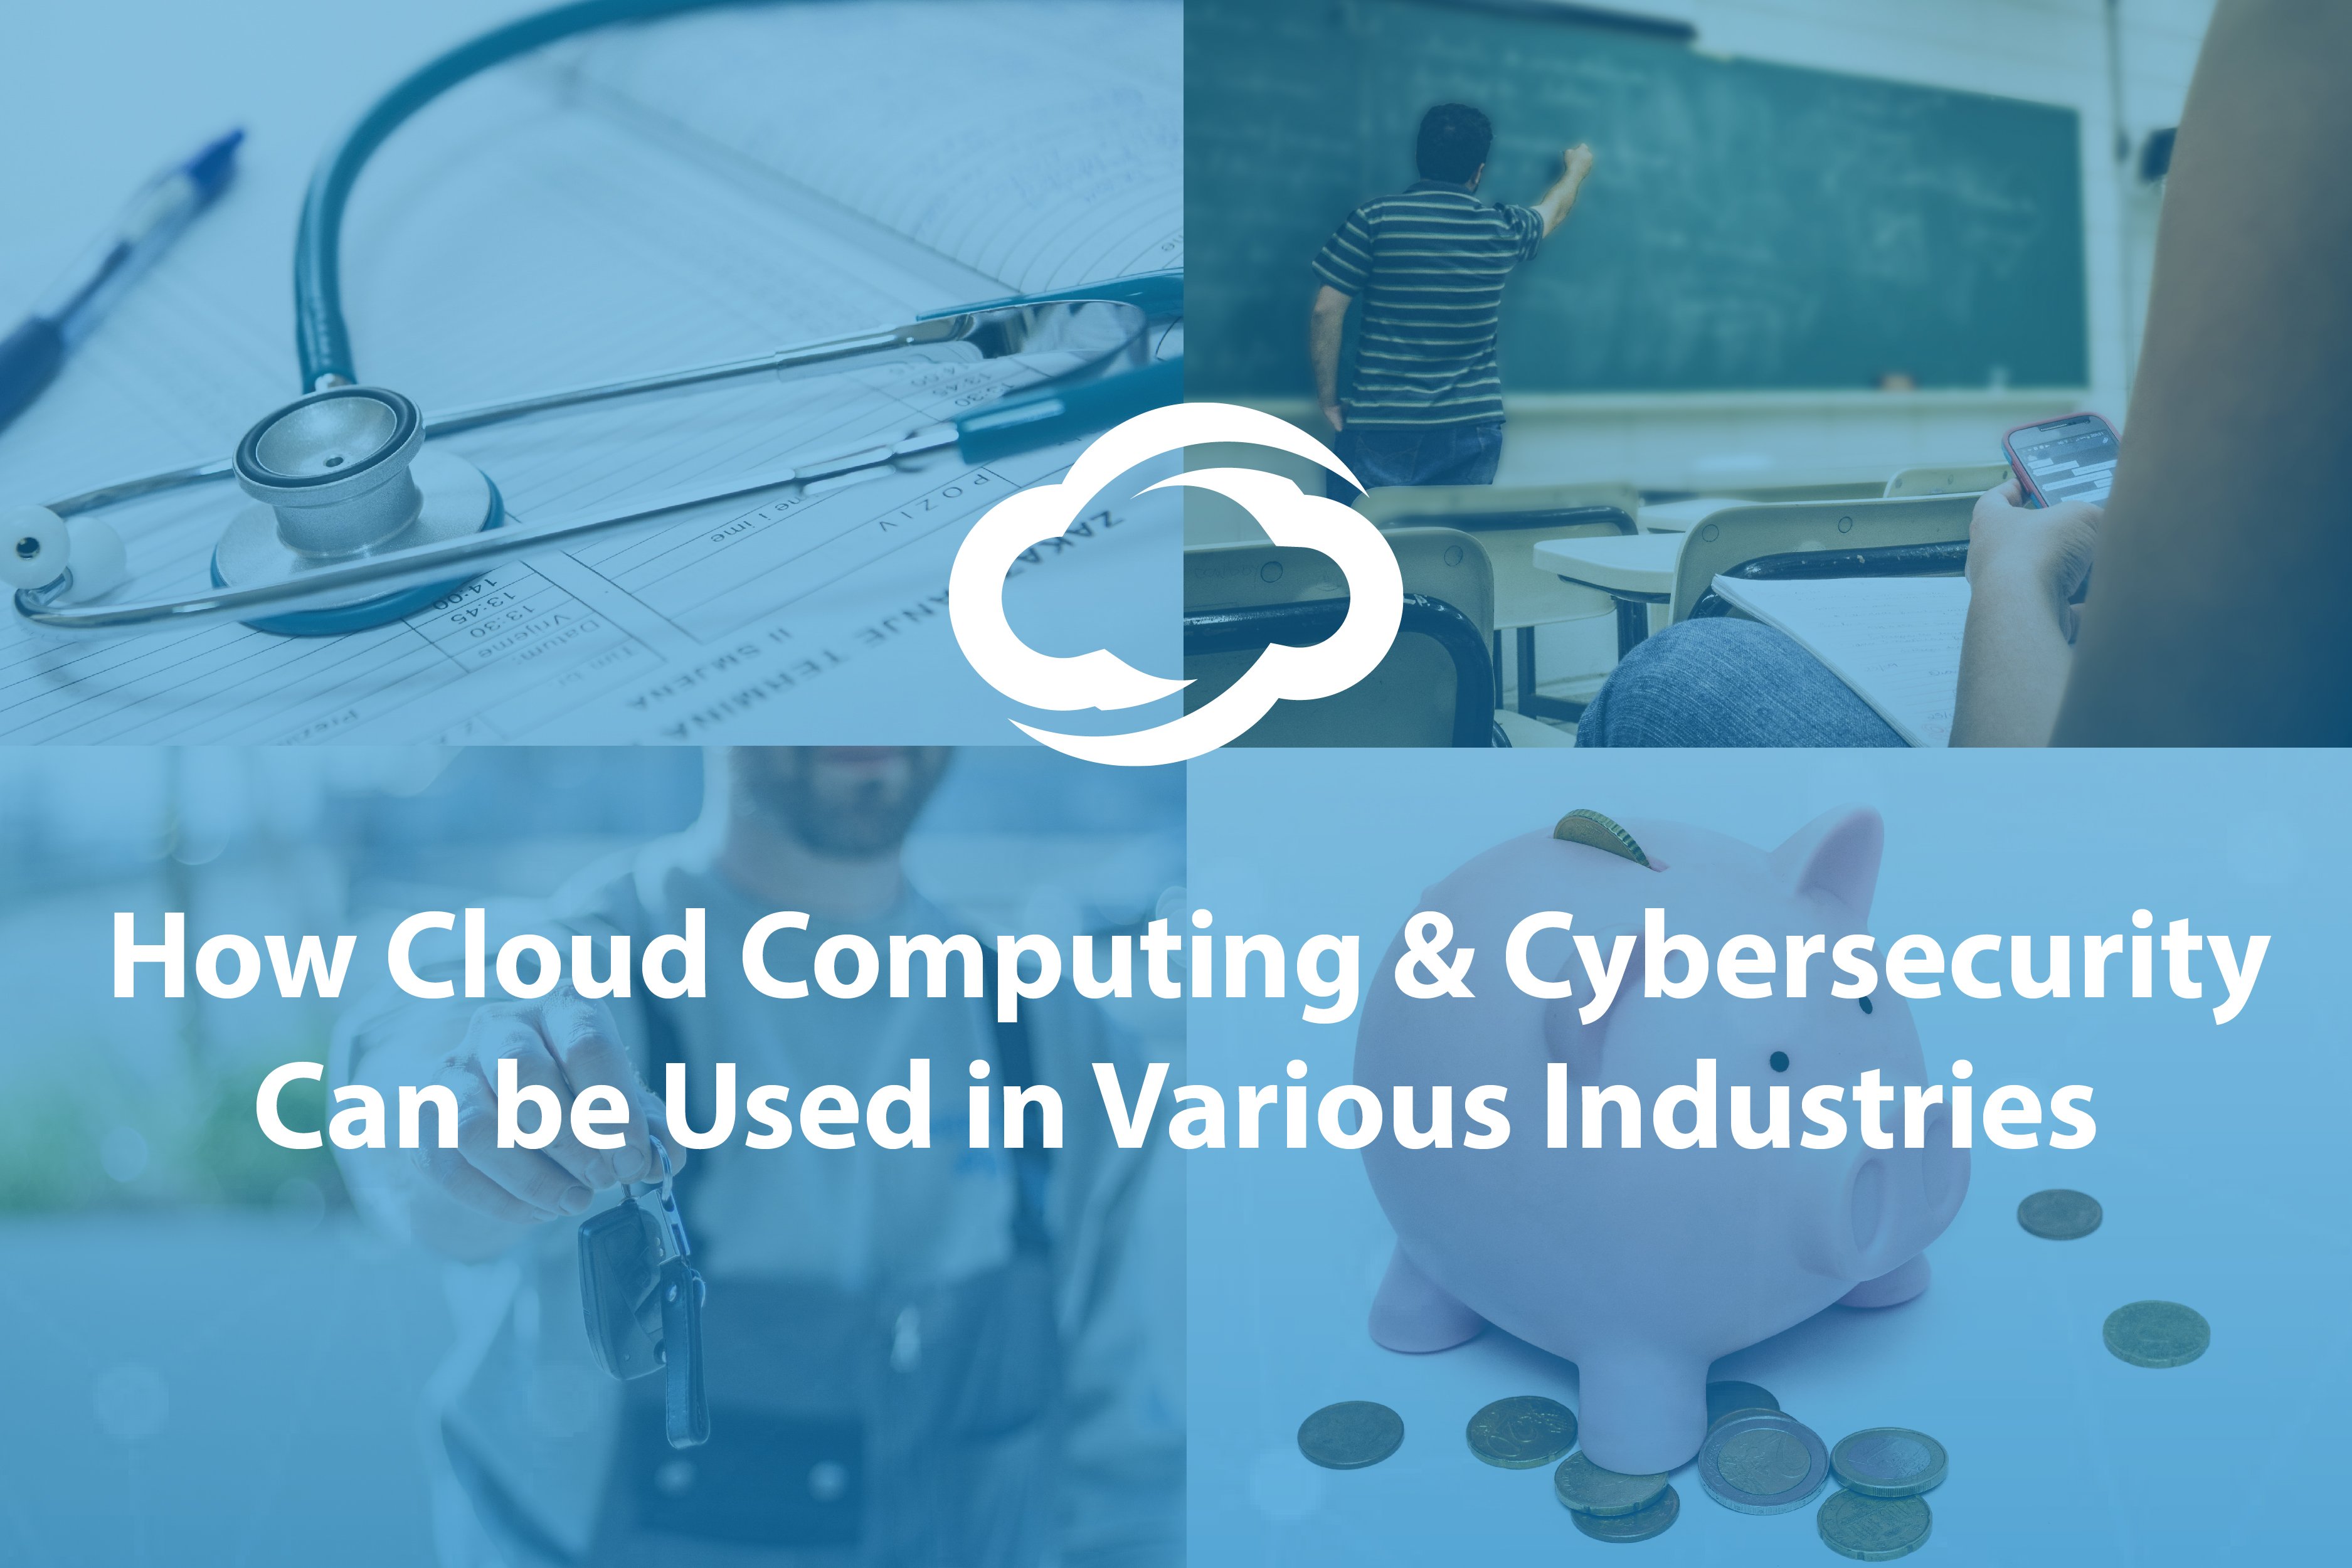 How Cloud Computing and Cybersecurity Can be Used in Various Industries